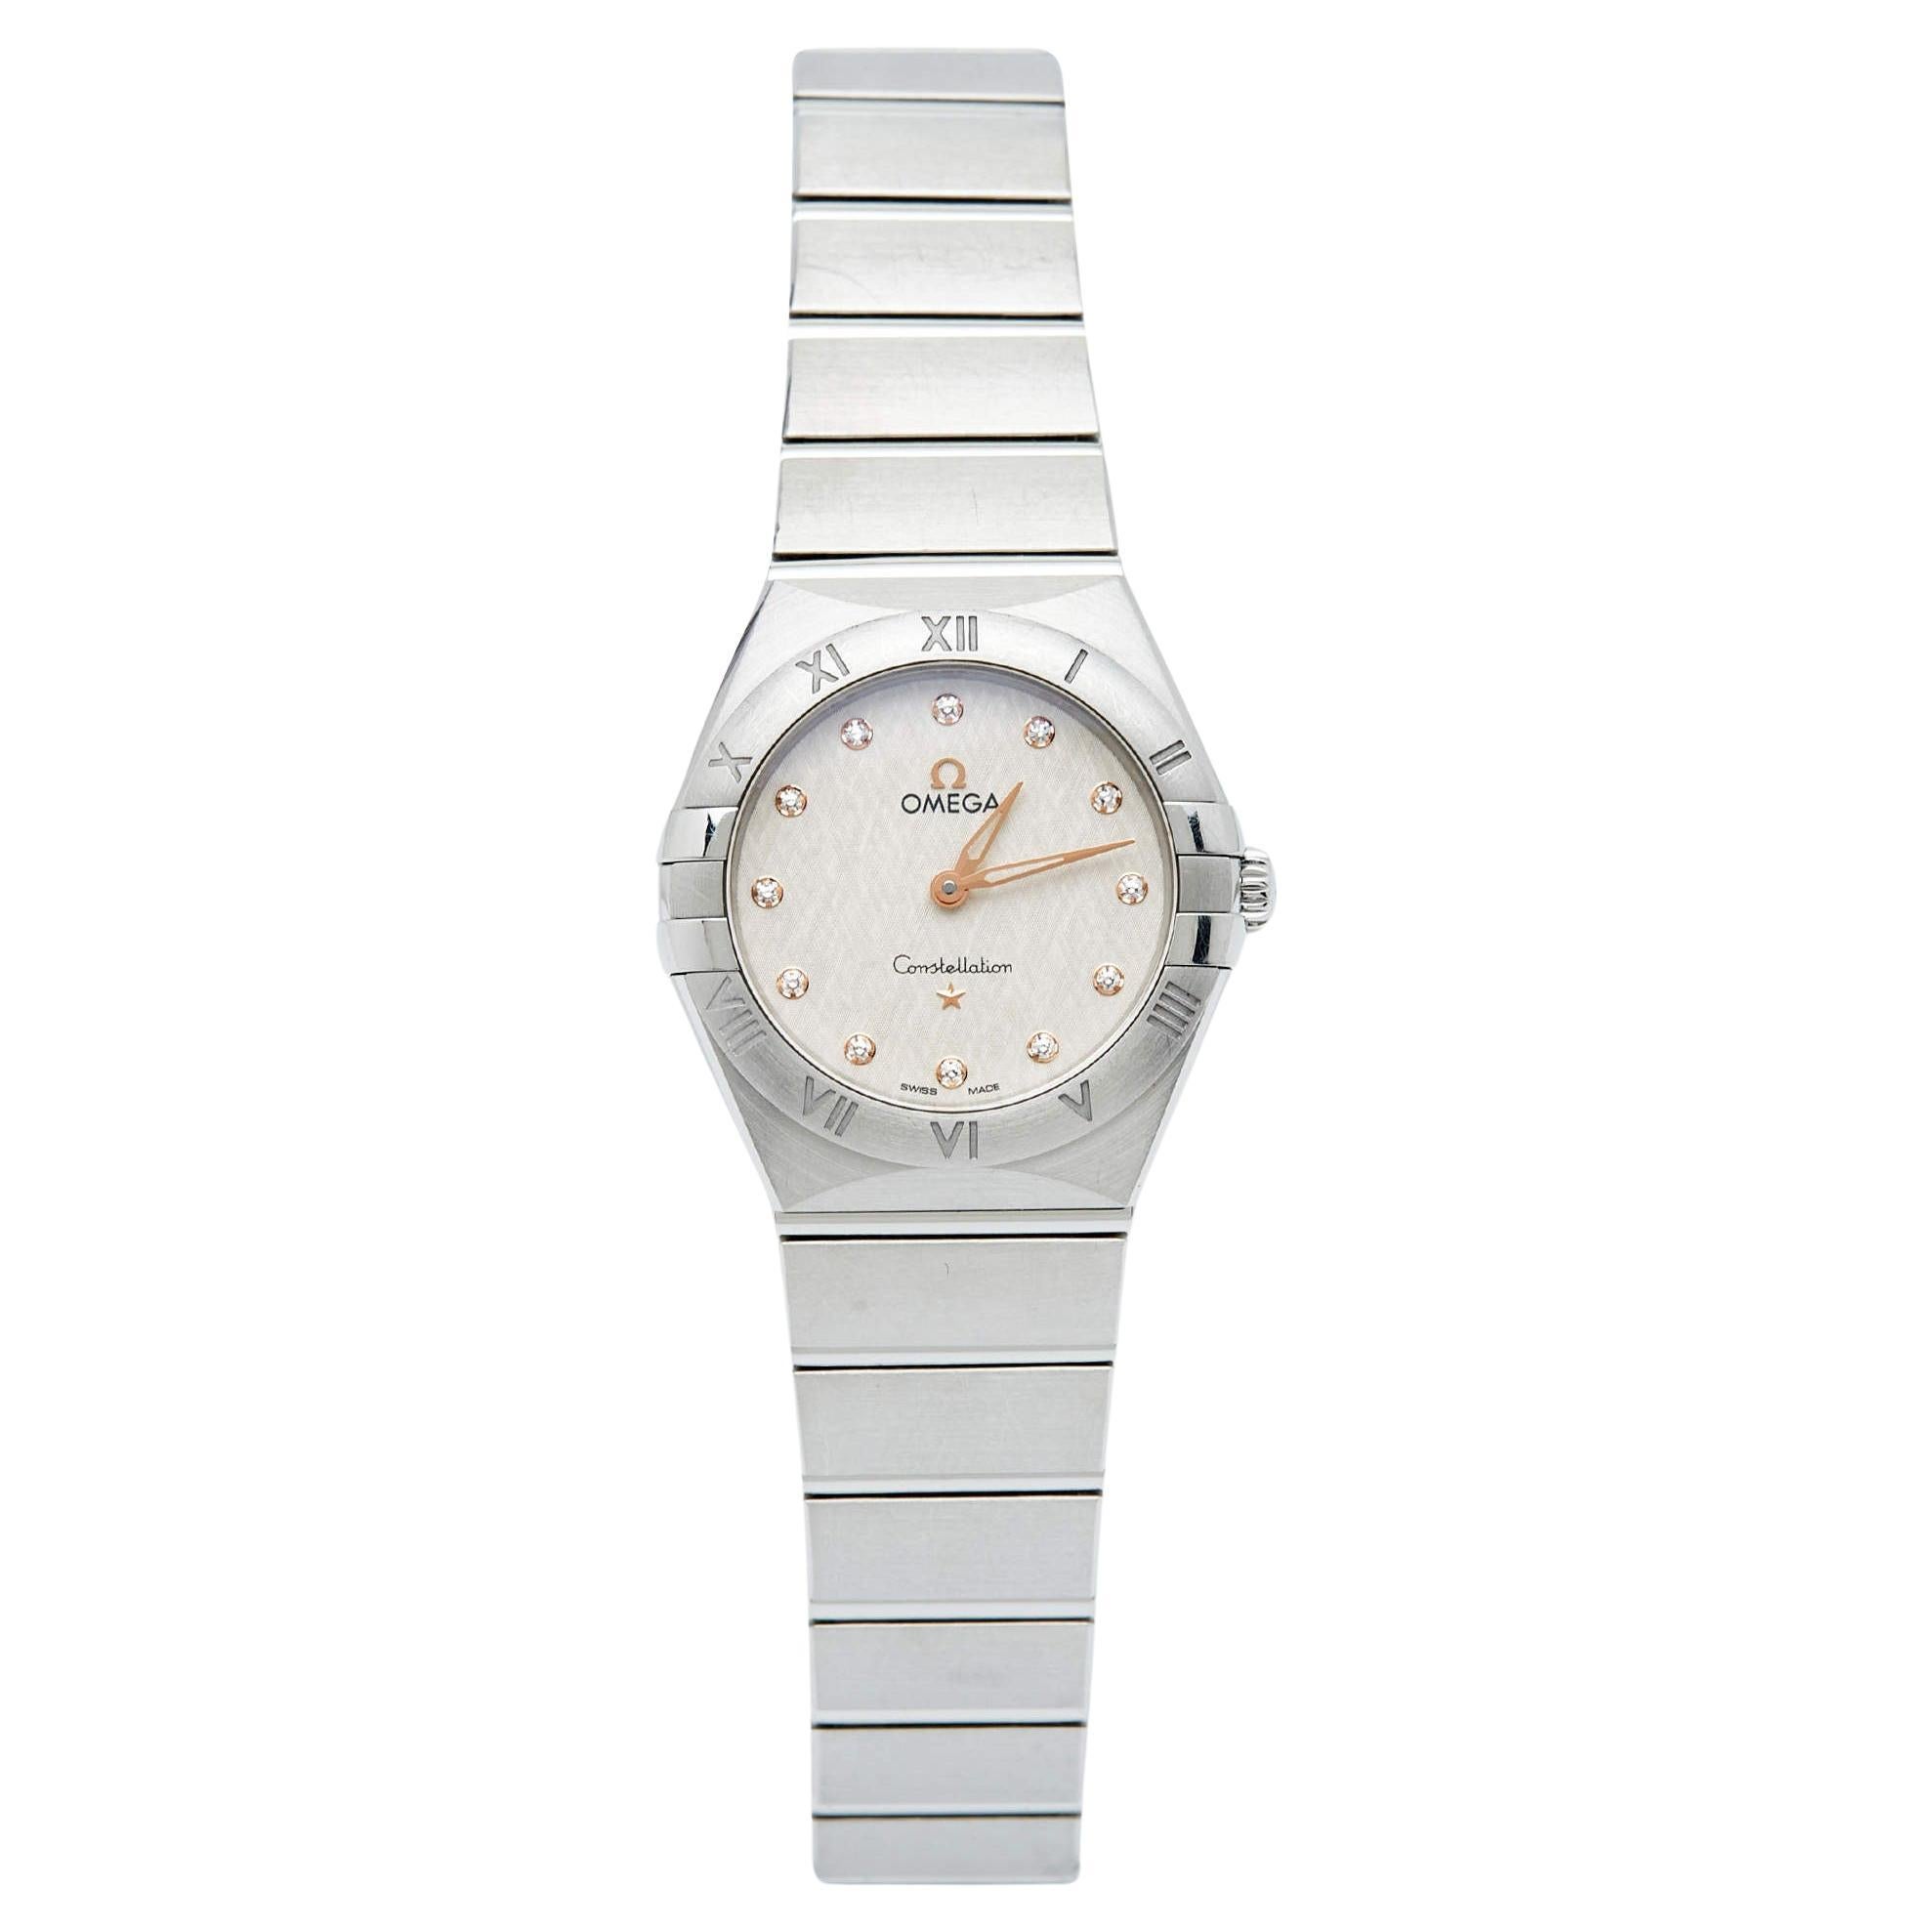 Omega Silver Diamond Stainless Steel Constellation 131.10.28.60.52.001 Women's W For Sale